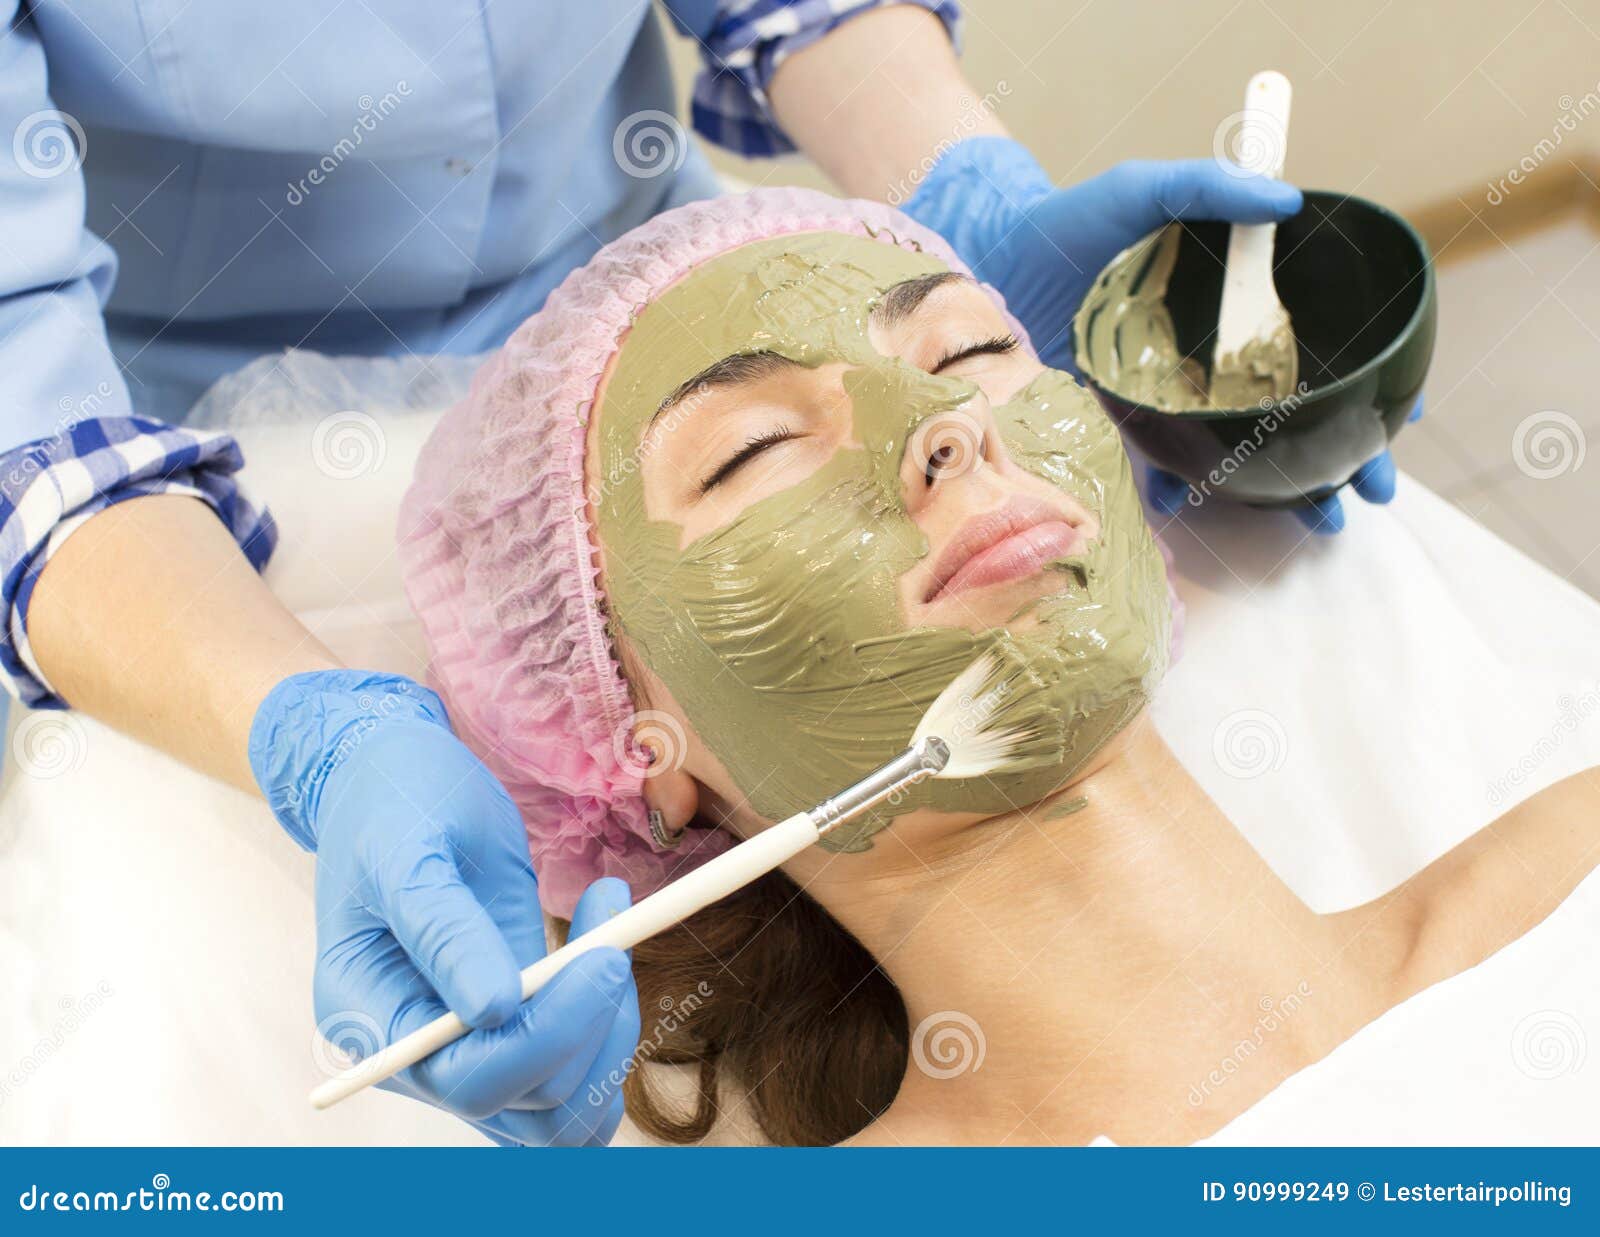 Process Cosmetic Mask Of Massage And Facials Stock Image Image Of Cosmetic Care 90999249